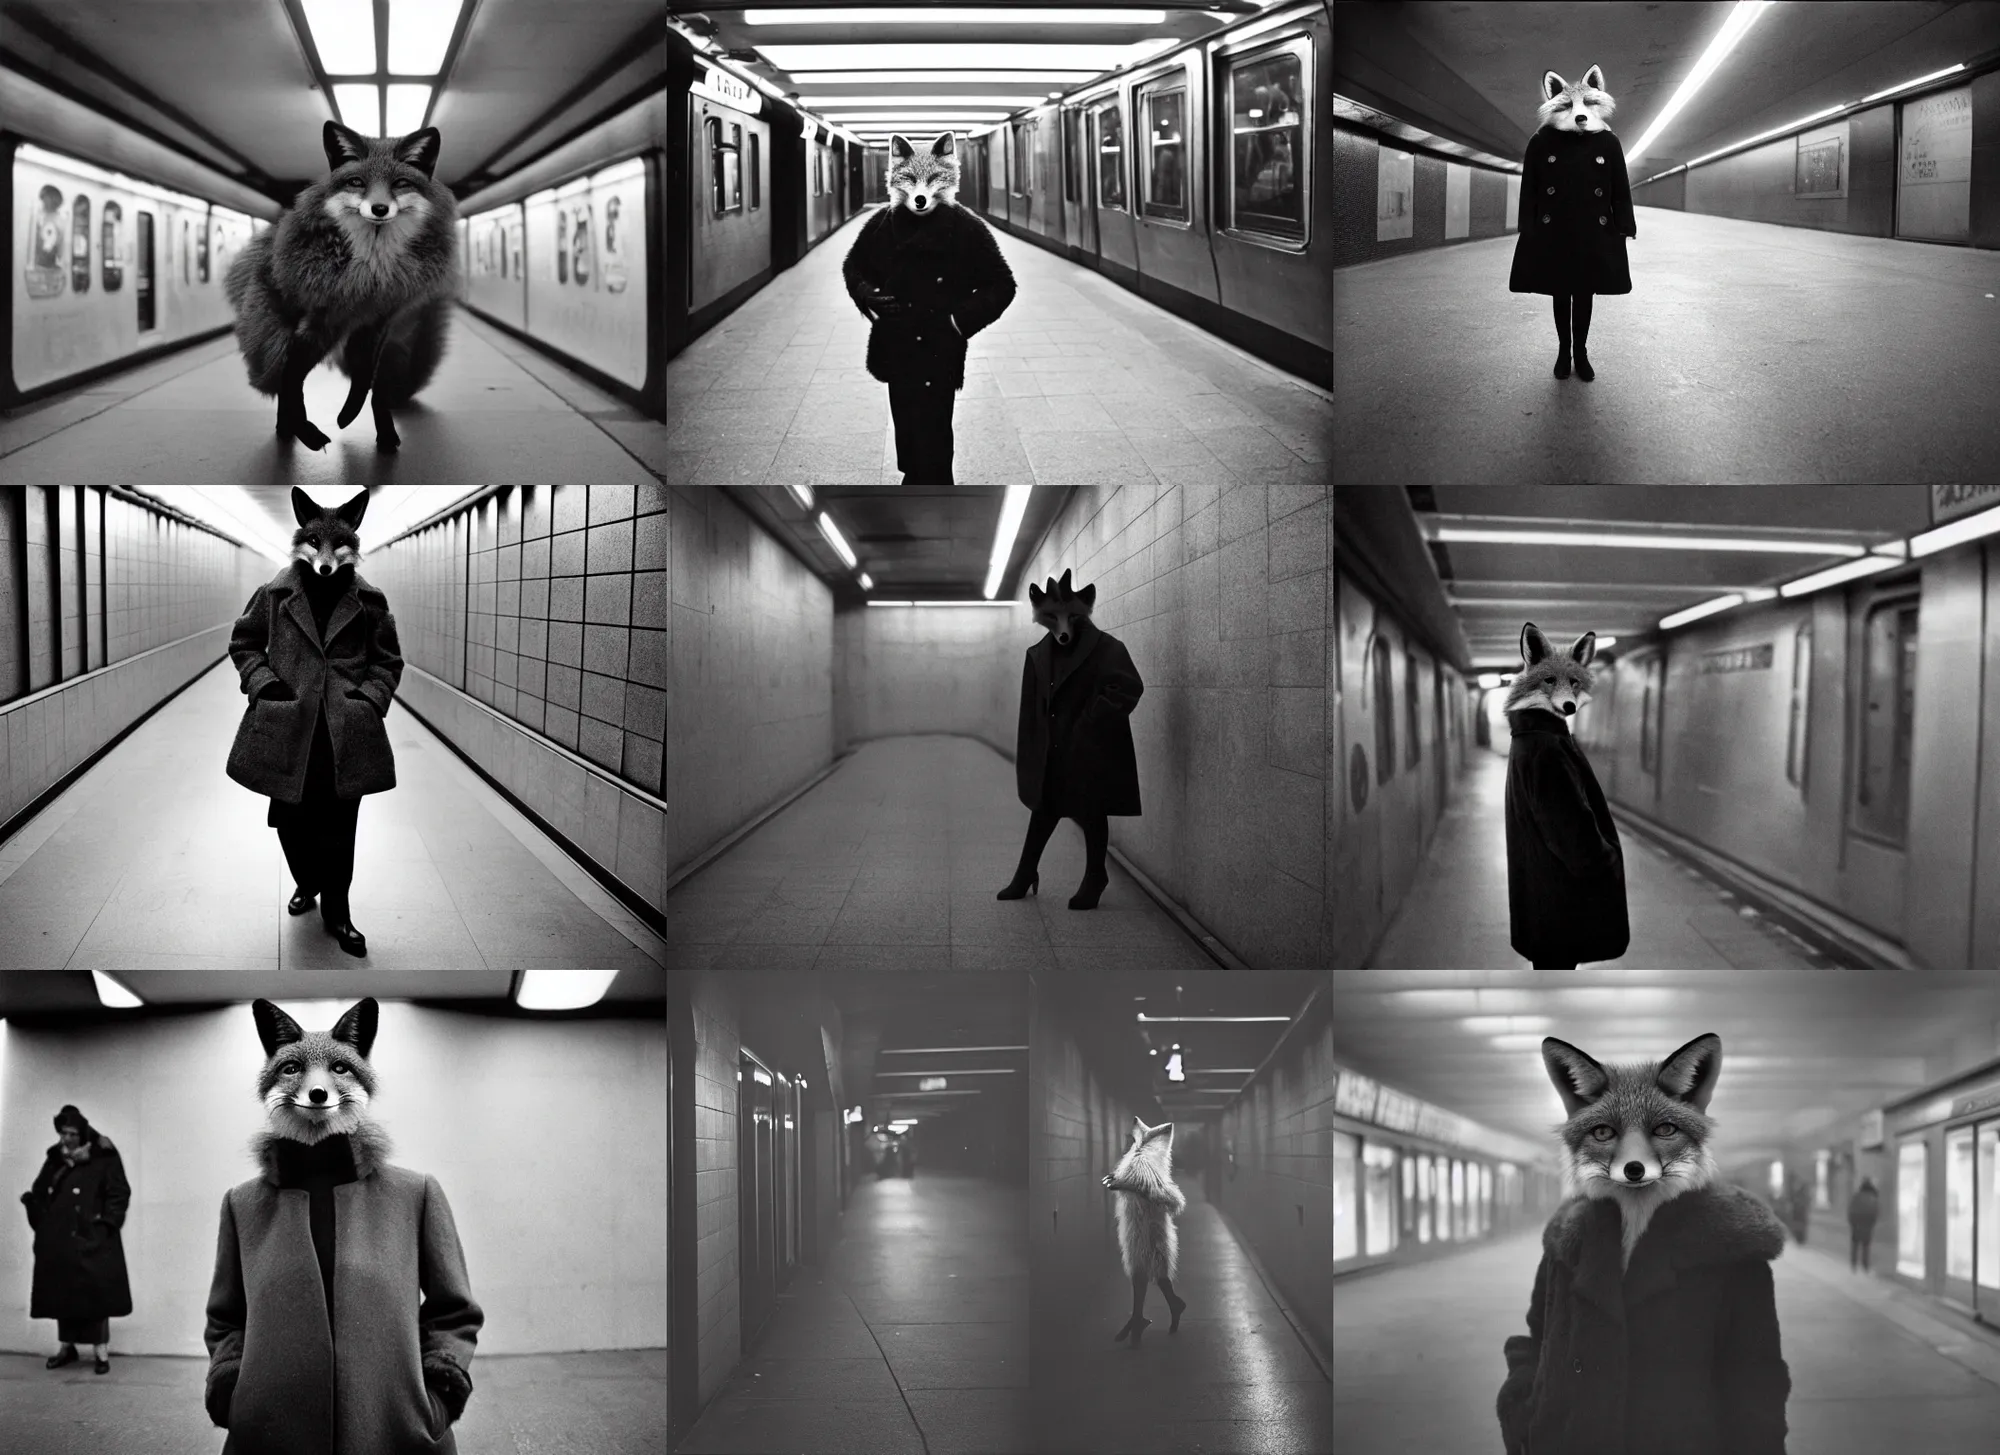 Prompt: an anthropomorphic fox wearing a coat, in a subway, by richard avedon, tri - x pan, ominous lighting